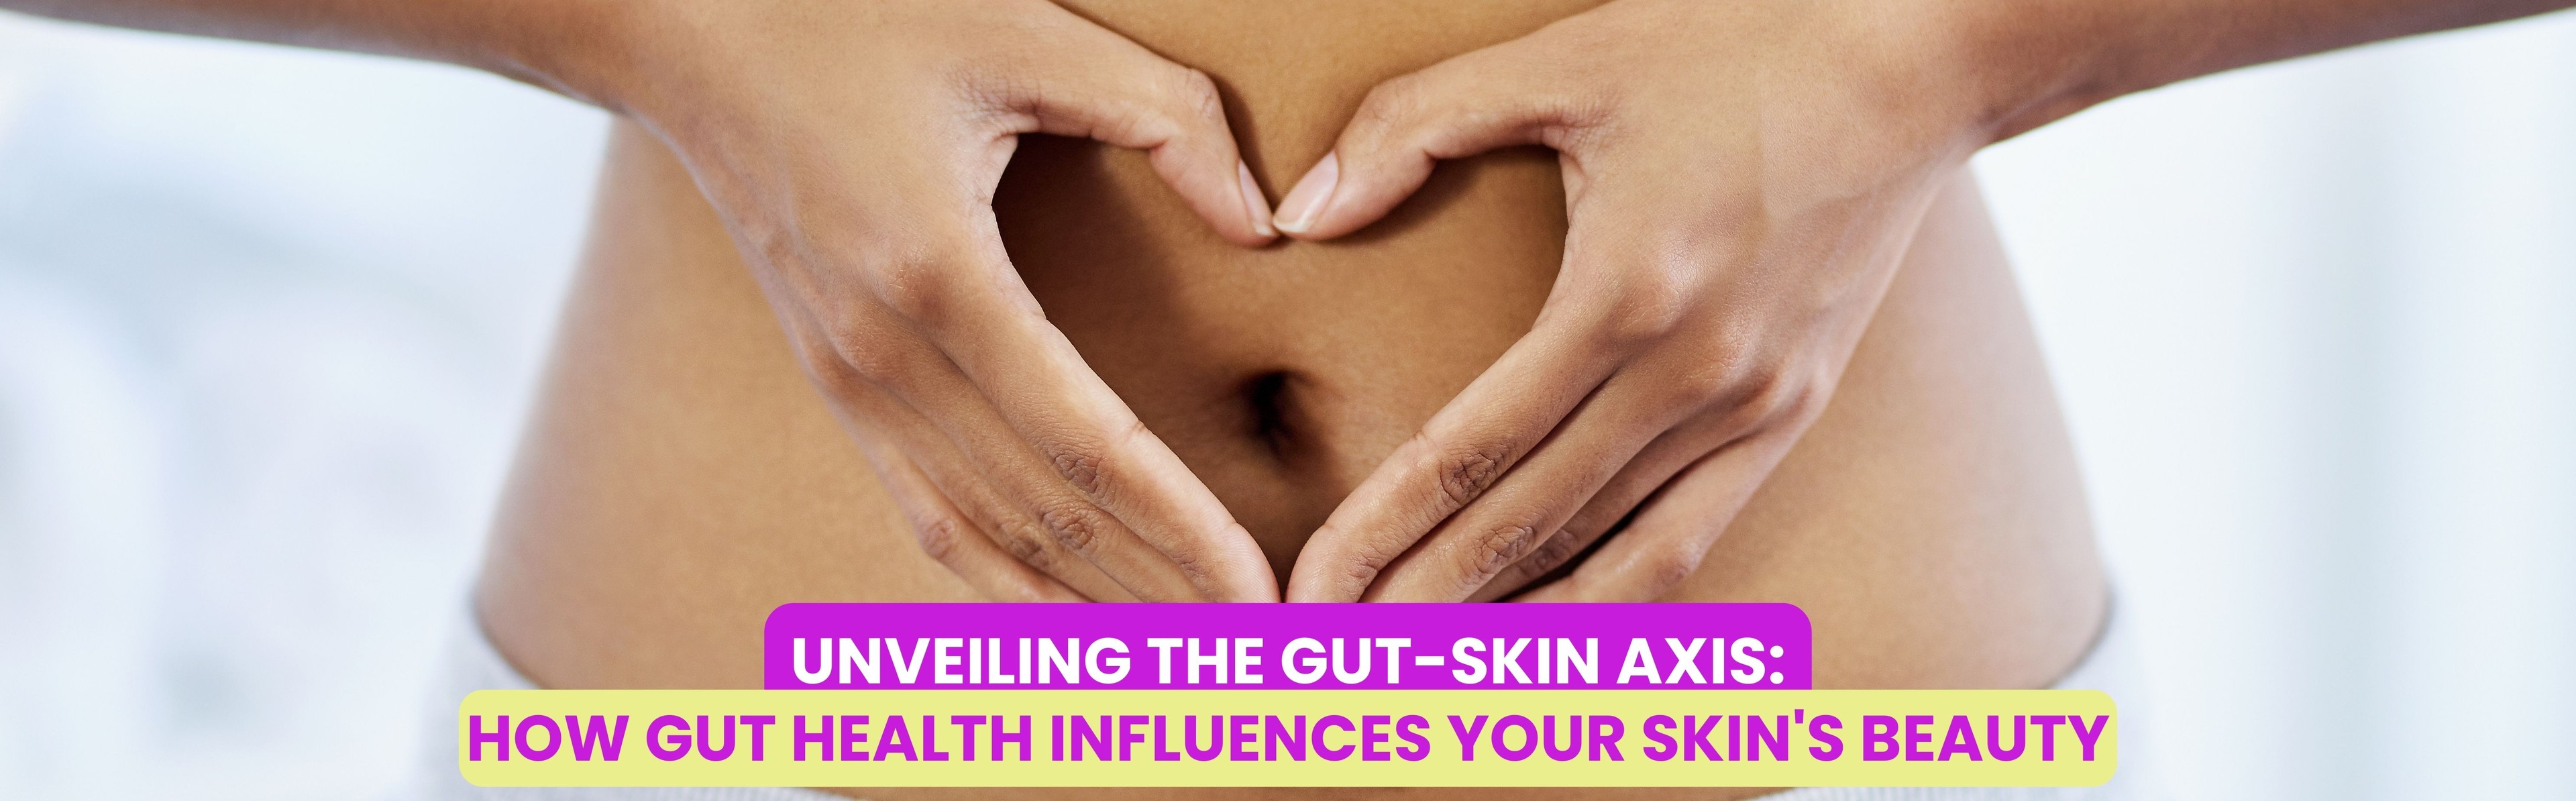 The Connection Between Gut Health and Skin Appearance